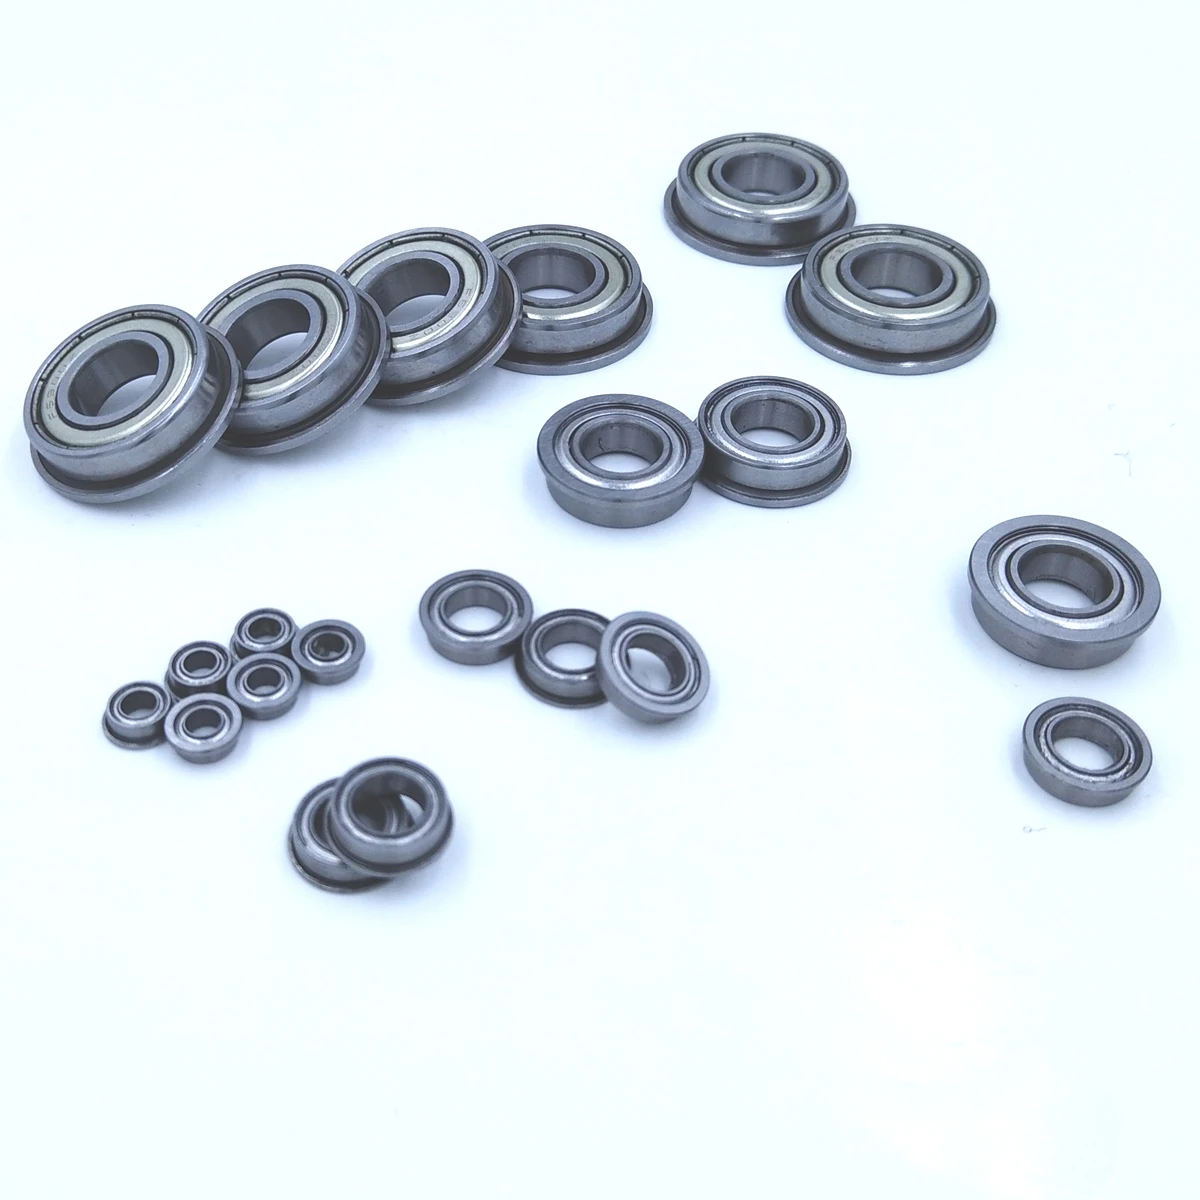 10Pcs 1Lot F674 F674-ZZ F674ZZ F674-2Z F674Z zz z 2z MF74ZZ MF74 MF74-zz Flanged Flange Ball Bearing 4 x 7 x 2.5mm images - 2